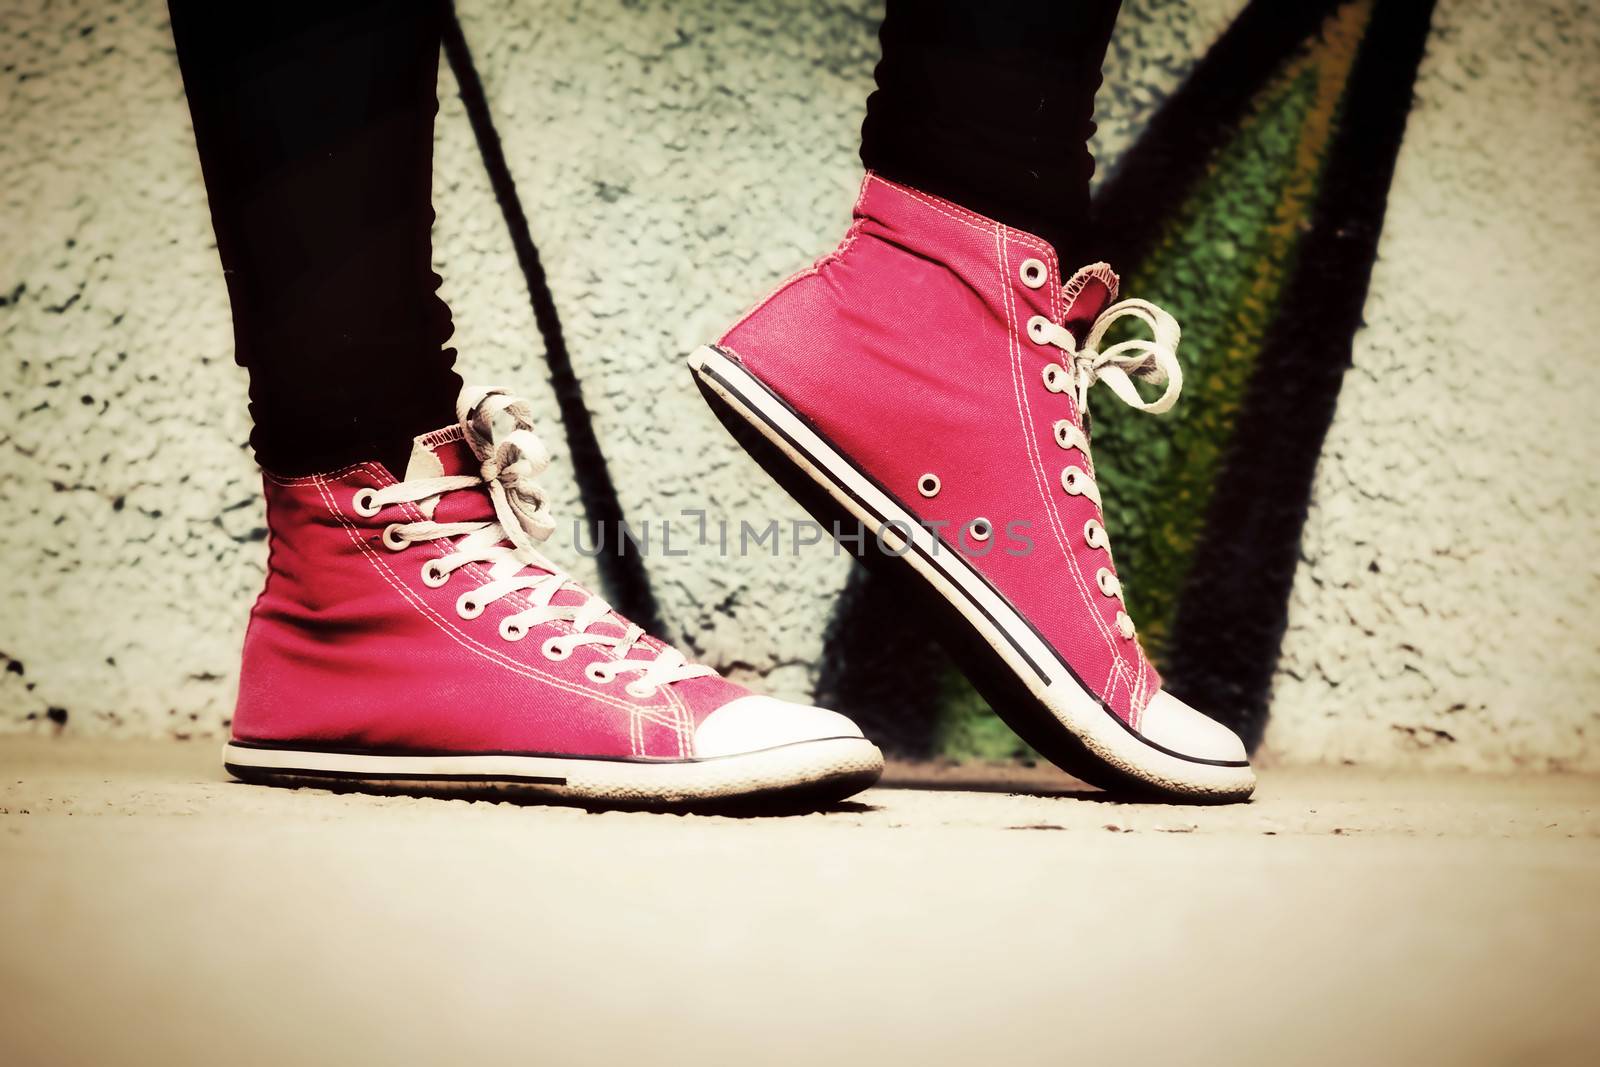 Close up of pink sneakers worn by a teenager. Grunge graffiti wall, retro vintage style